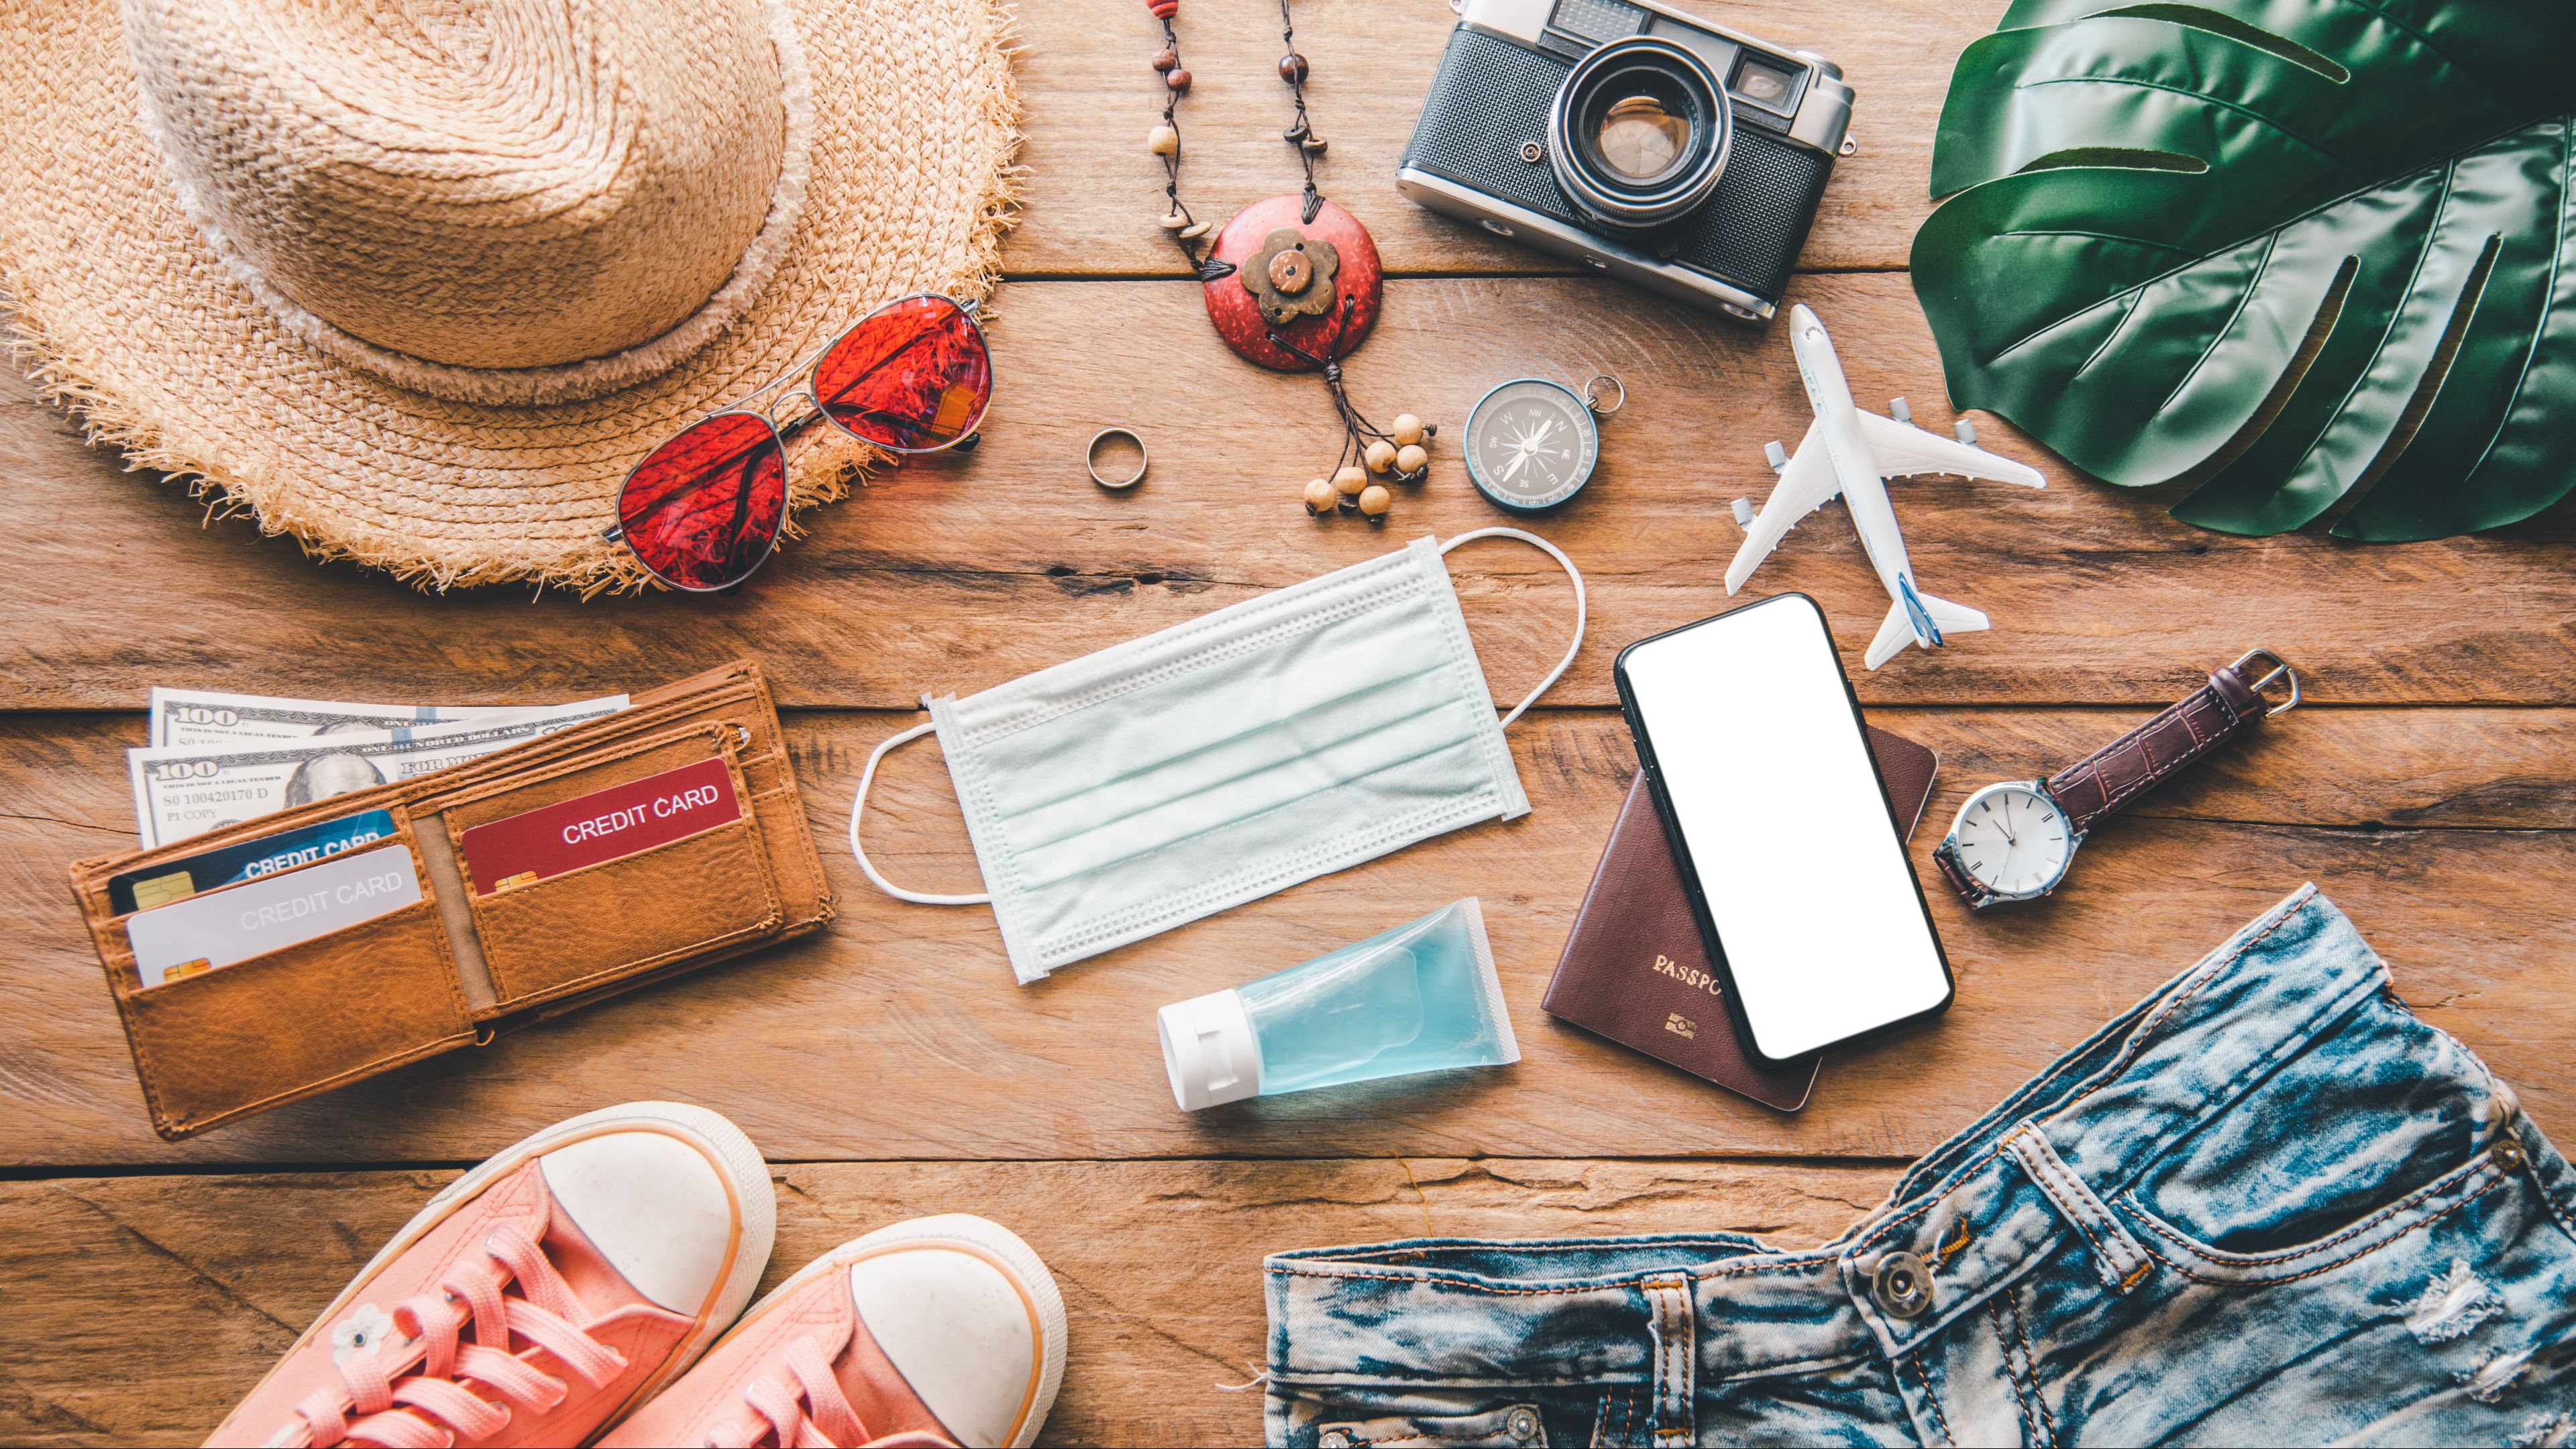 7 Tiny Travel Gadgets You Can't Leave Home Without